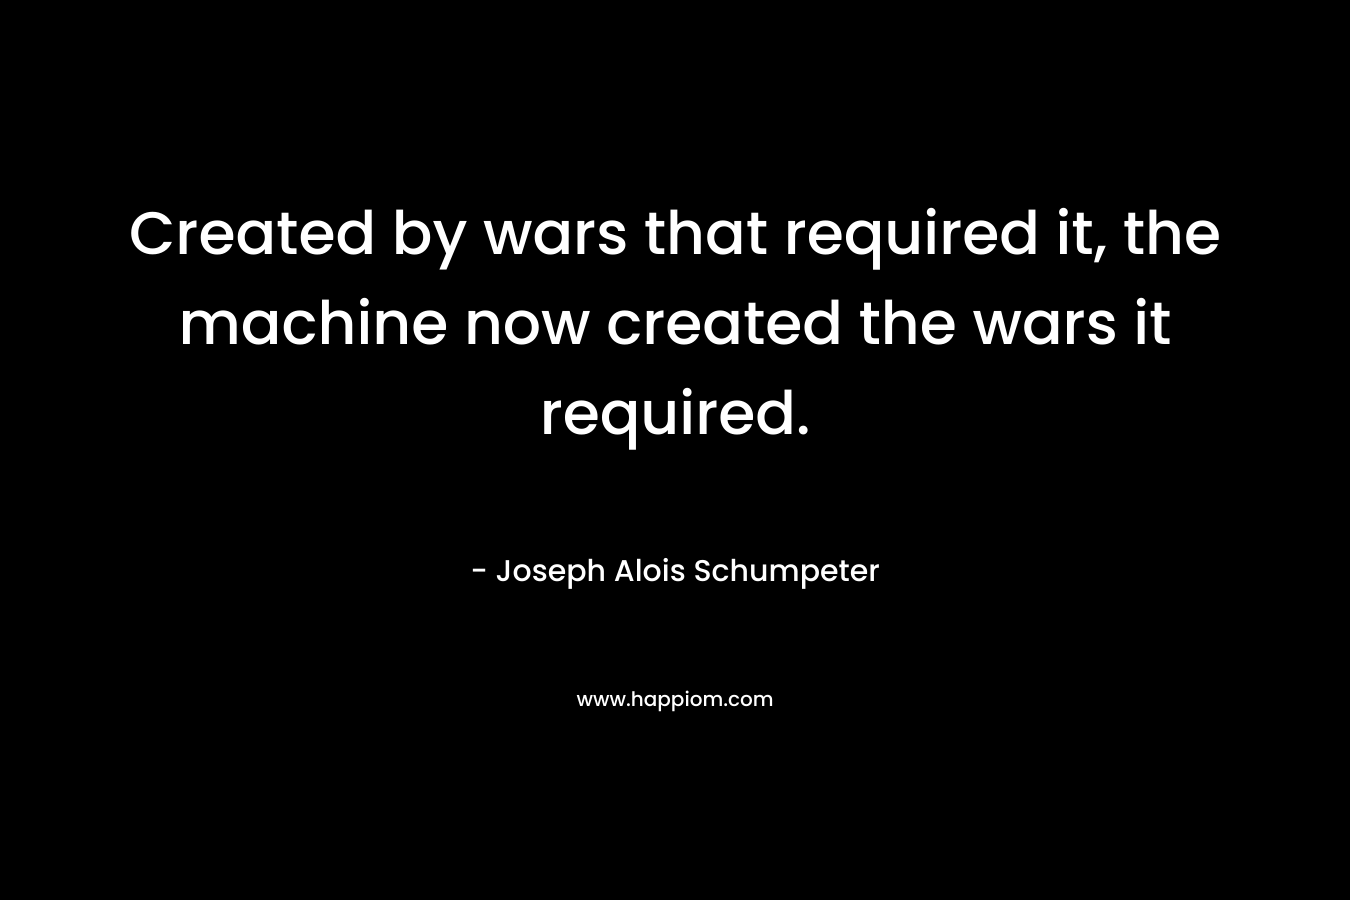 Created by wars that required it, the machine now created the wars it required.